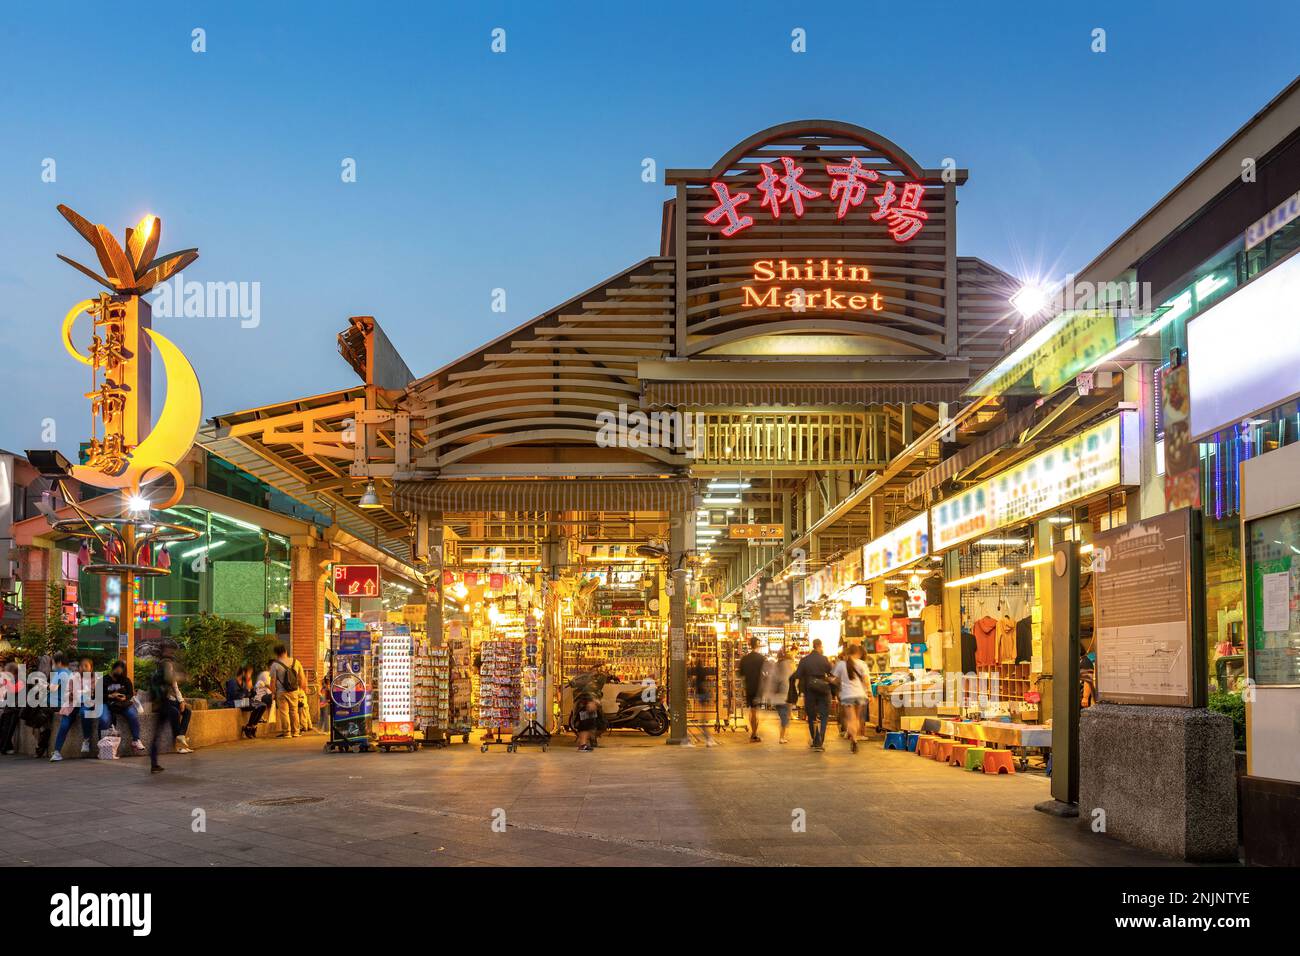 Famous Shilin night market in Taipei, taiwan. the translation of the chinese characters is 'shilin market' Stock Photo